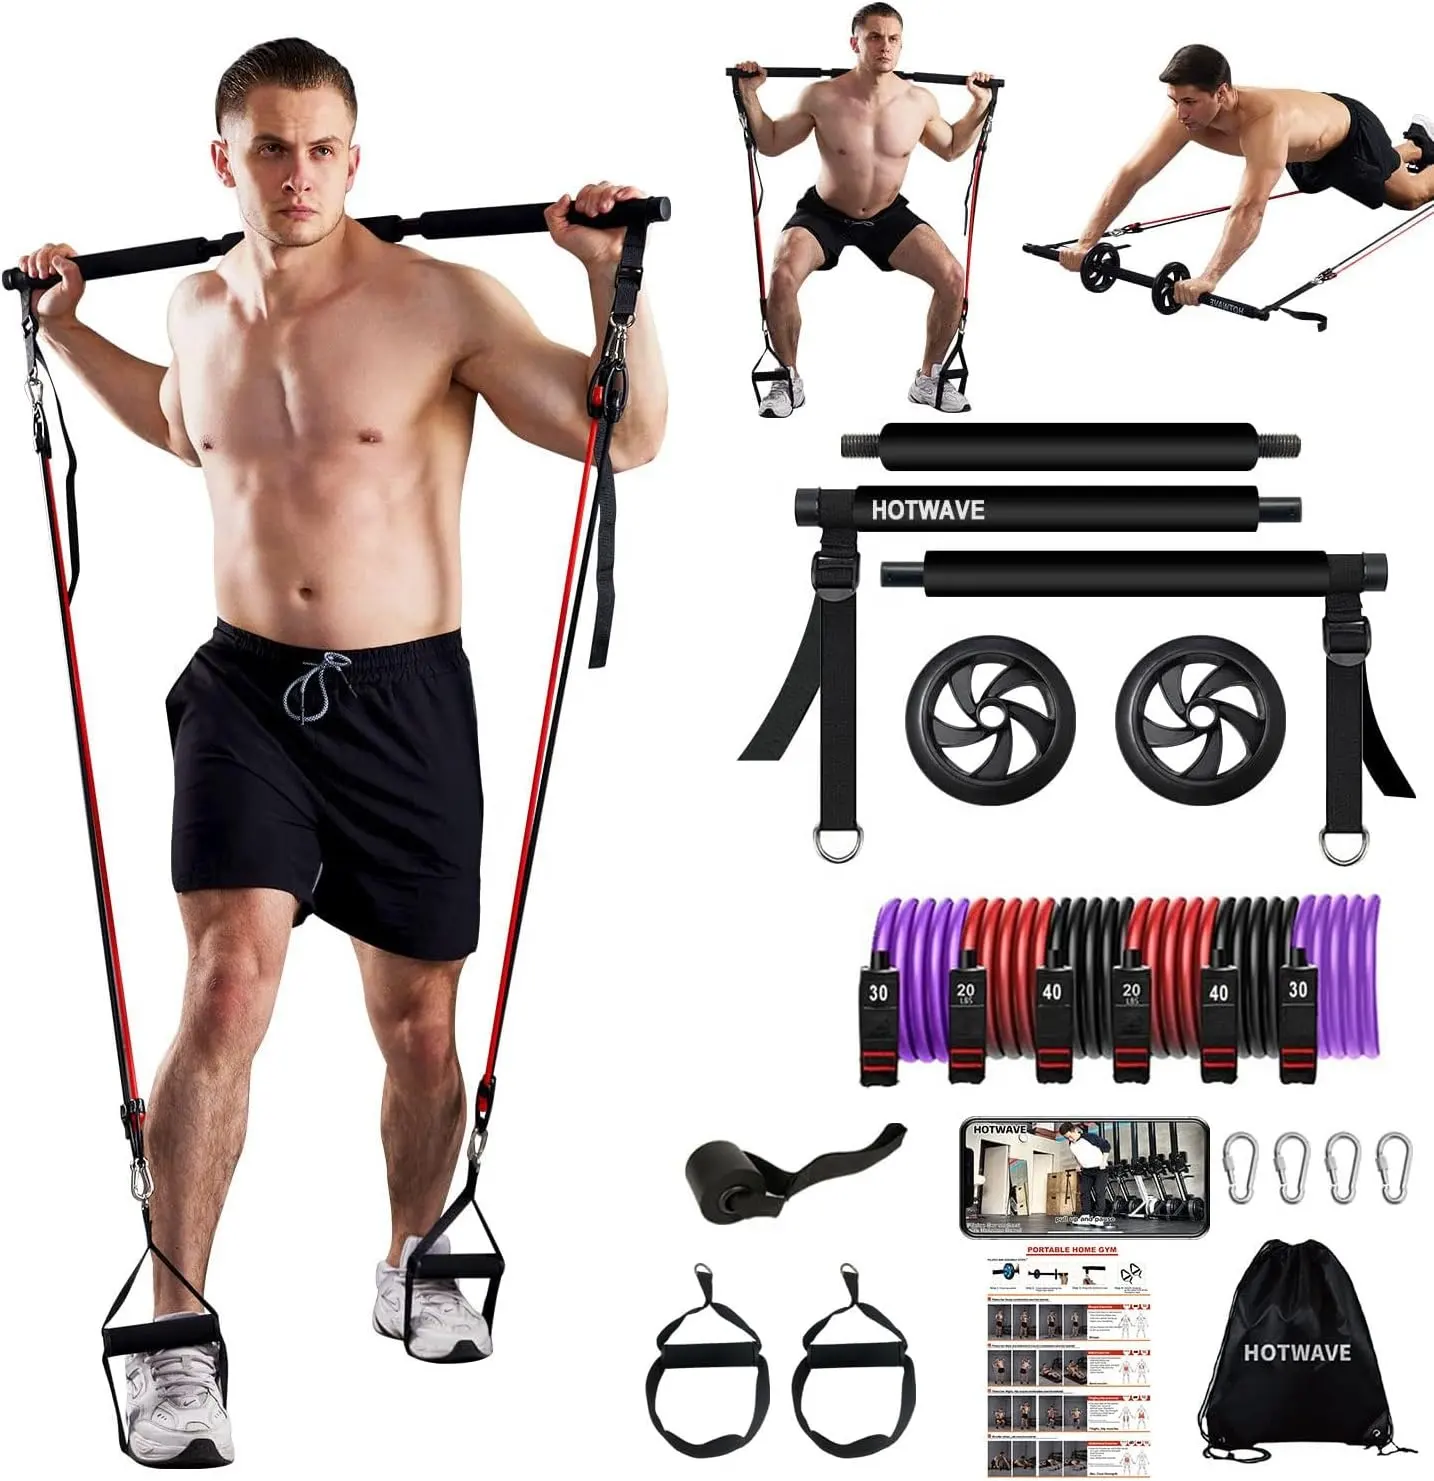 MR Multifunction Portable Pilates Bar Theraband stick Exercise Portable Yoga Stick Pilates Bar Kit With Resistance Band roller